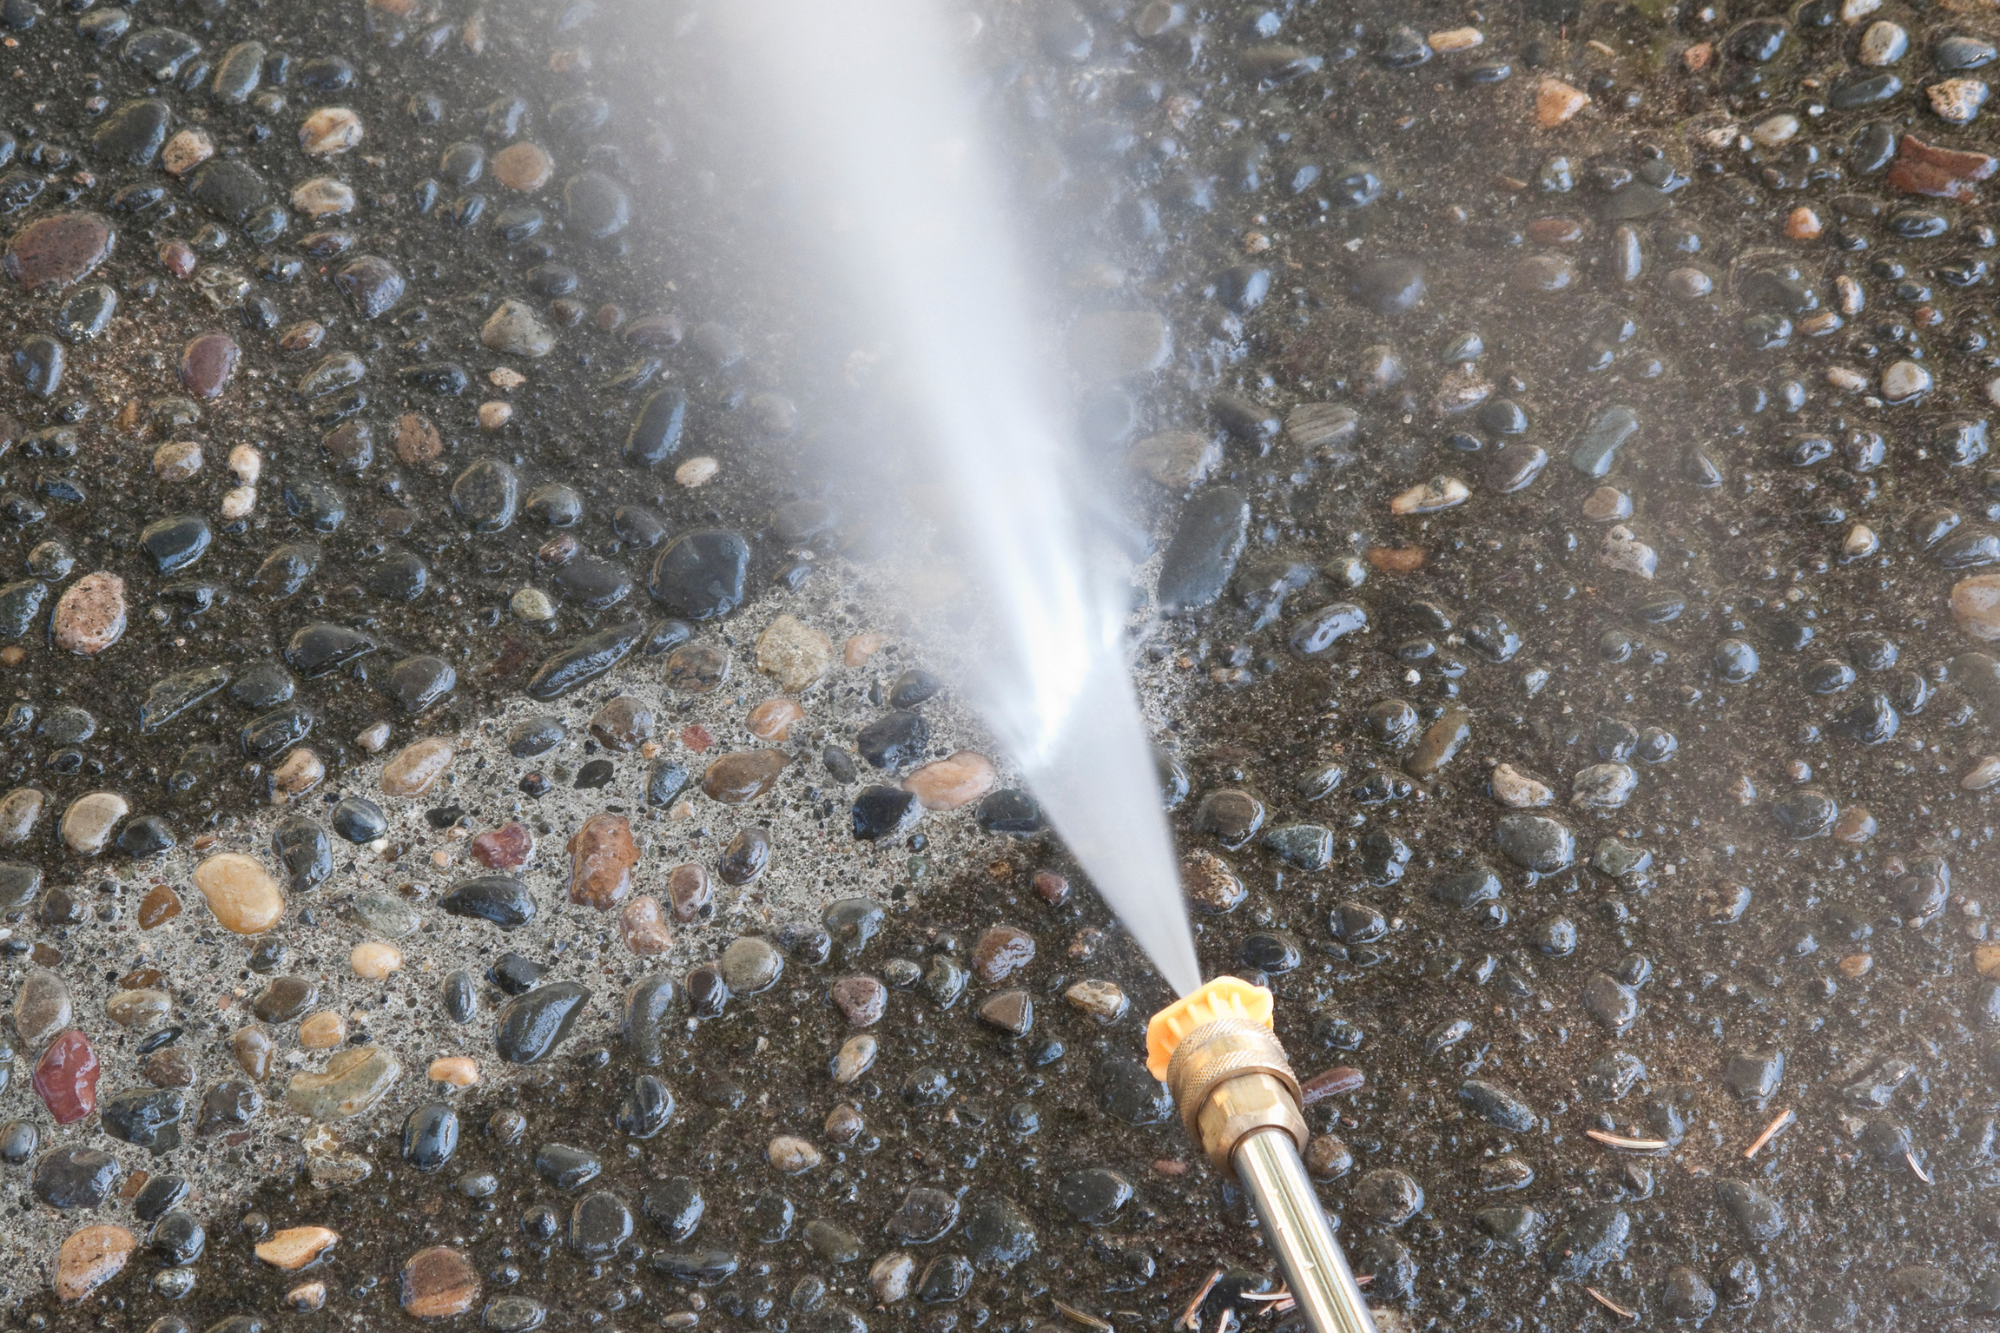 power washing commercial buildings